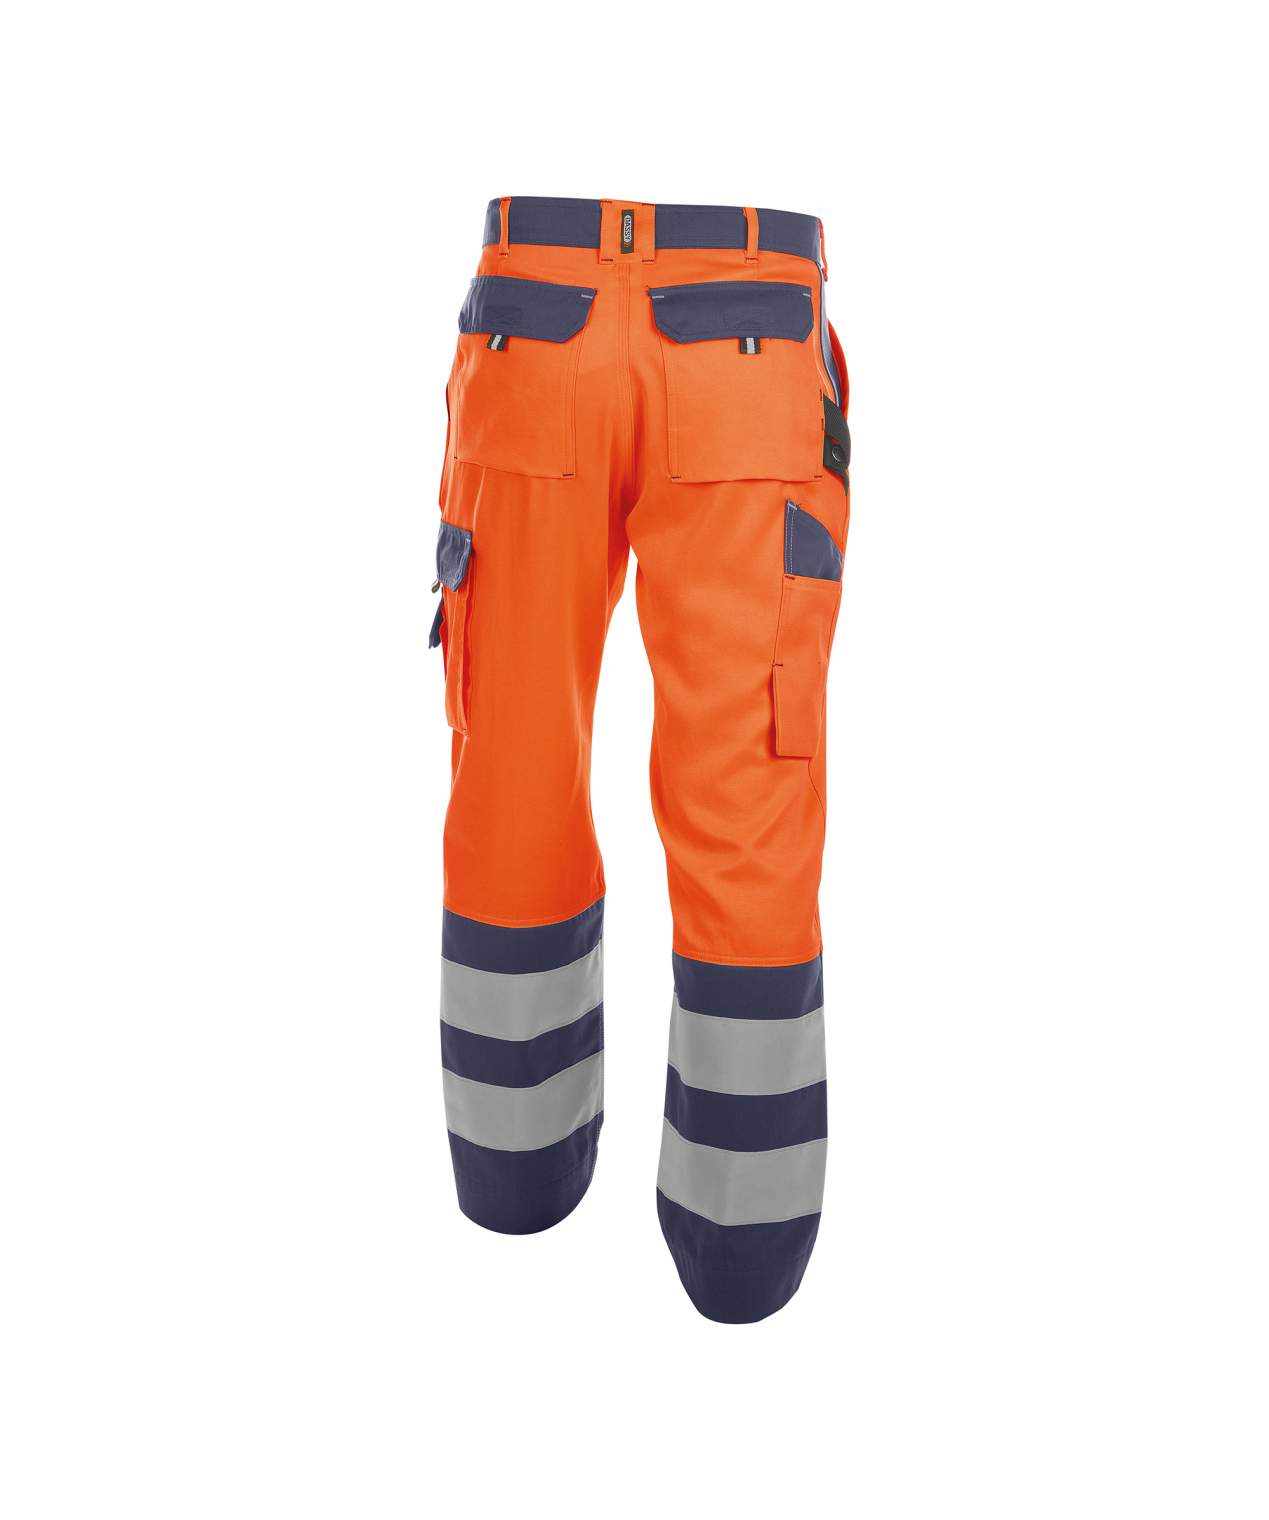 lancaster high visibility work trousers fluo orange navy back